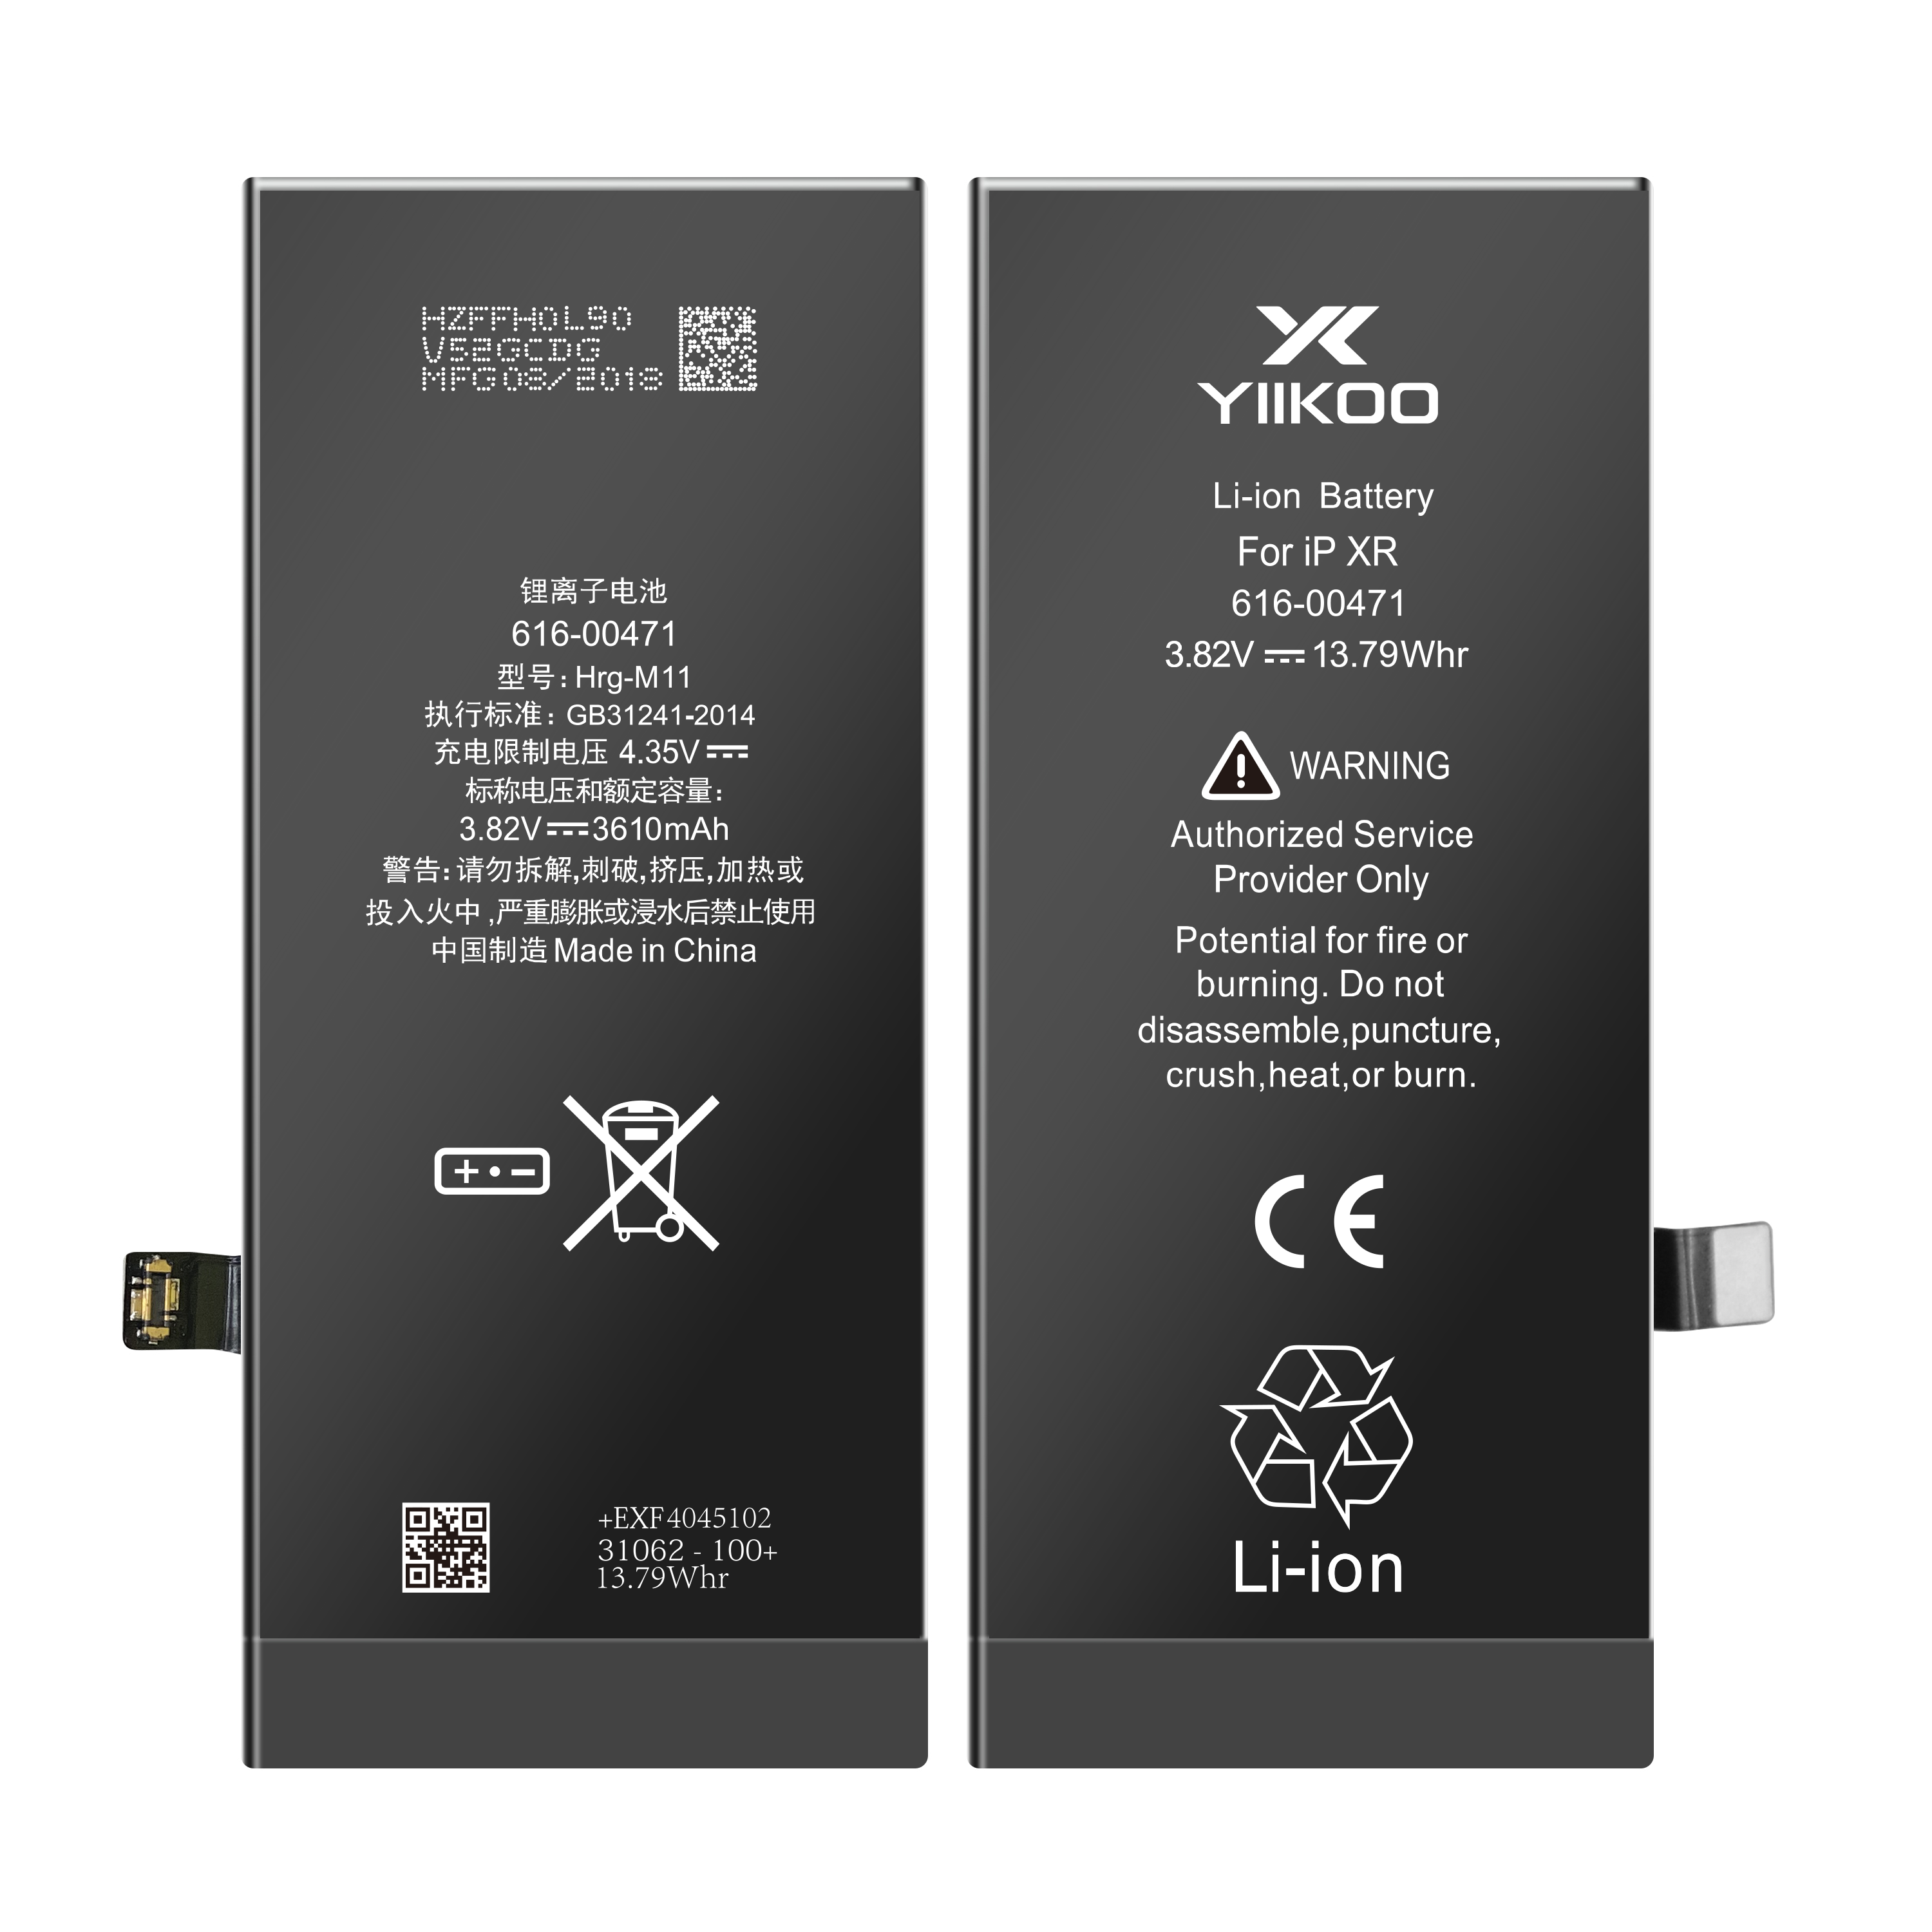 3610mAh Original High Capacity Battery For IPhone XR Premium Quality Brand New 0 Cycle